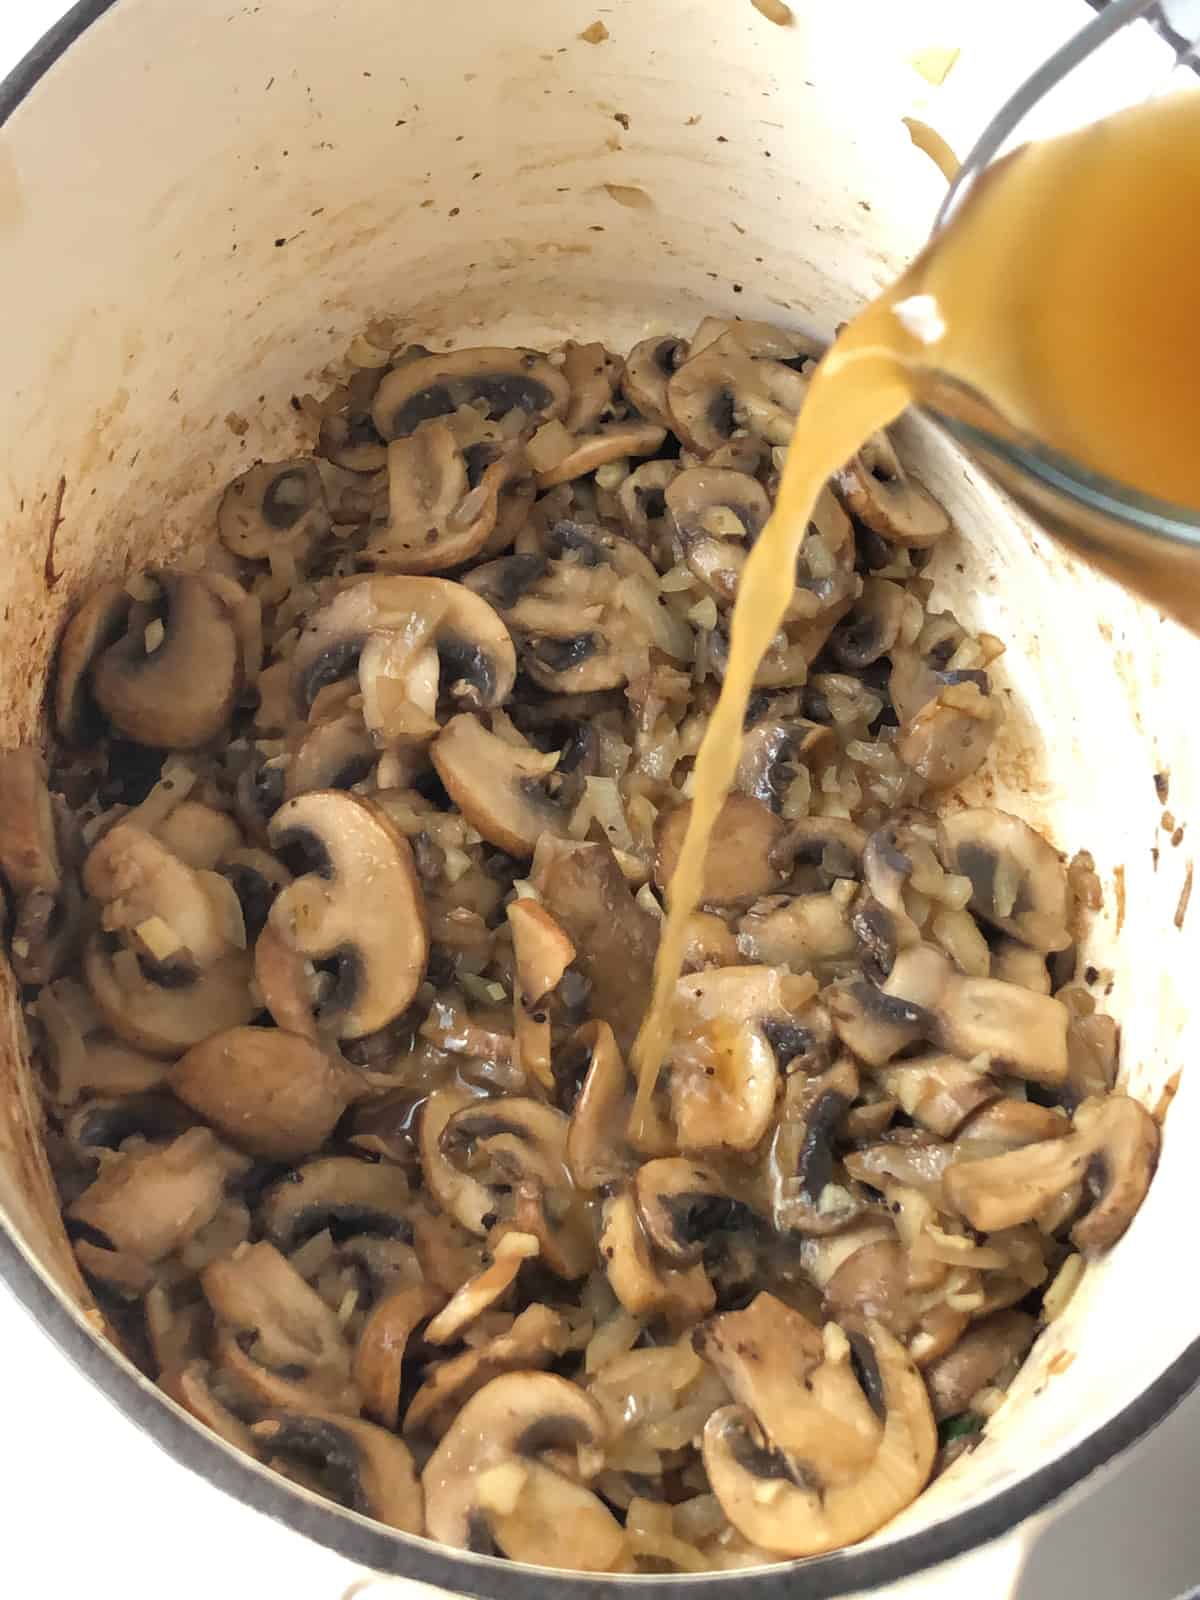 Vegetable broth being poured into a Dutch oven filled with sauteed mushrooms and onions.